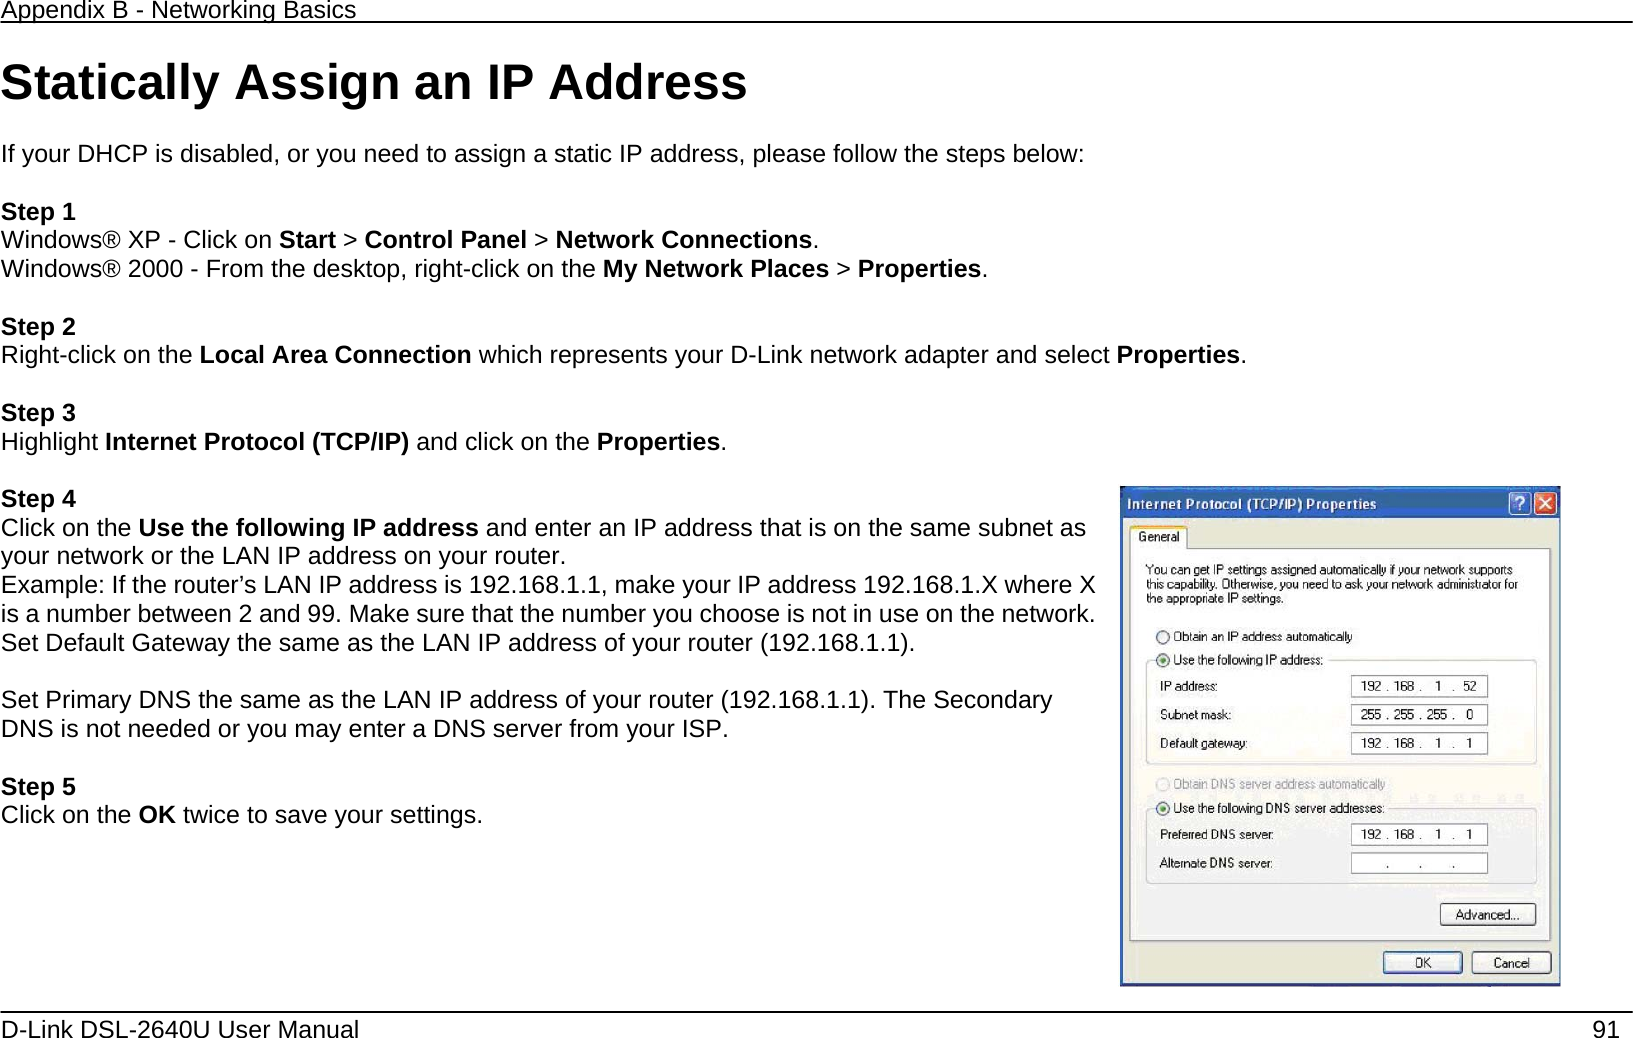 Appendix B - Networking Basics   D-Link DSL-2640U User Manual    91 Statically Assign an IP Address  If your DHCP is disabled, or you need to assign a static IP address, please follow the steps below:  Step 1 Windows® XP - Click on Start &gt; Control Panel &gt; Network Connections. Windows® 2000 - From the desktop, right-click on the My Network Places &gt; Properties.  Step 2 Right-click on the Local Area Connection which represents your D-Link network adapter and select Properties.  Step 3 Highlight Internet Protocol (TCP/IP) and click on the Properties.  Step 4 Click on the Use the following IP address and enter an IP address that is on the same subnet as your network or the LAN IP address on your router. Example: If the router’s LAN IP address is 192.168.1.1, make your IP address 192.168.1.X where X is a number between 2 and 99. Make sure that the number you choose is not in use on the network. Set Default Gateway the same as the LAN IP address of your router (192.168.1.1).  Set Primary DNS the same as the LAN IP address of your router (192.168.1.1). The Secondary DNS is not needed or you may enter a DNS server from your ISP.  Step 5 Click on the OK twice to save your settings.   